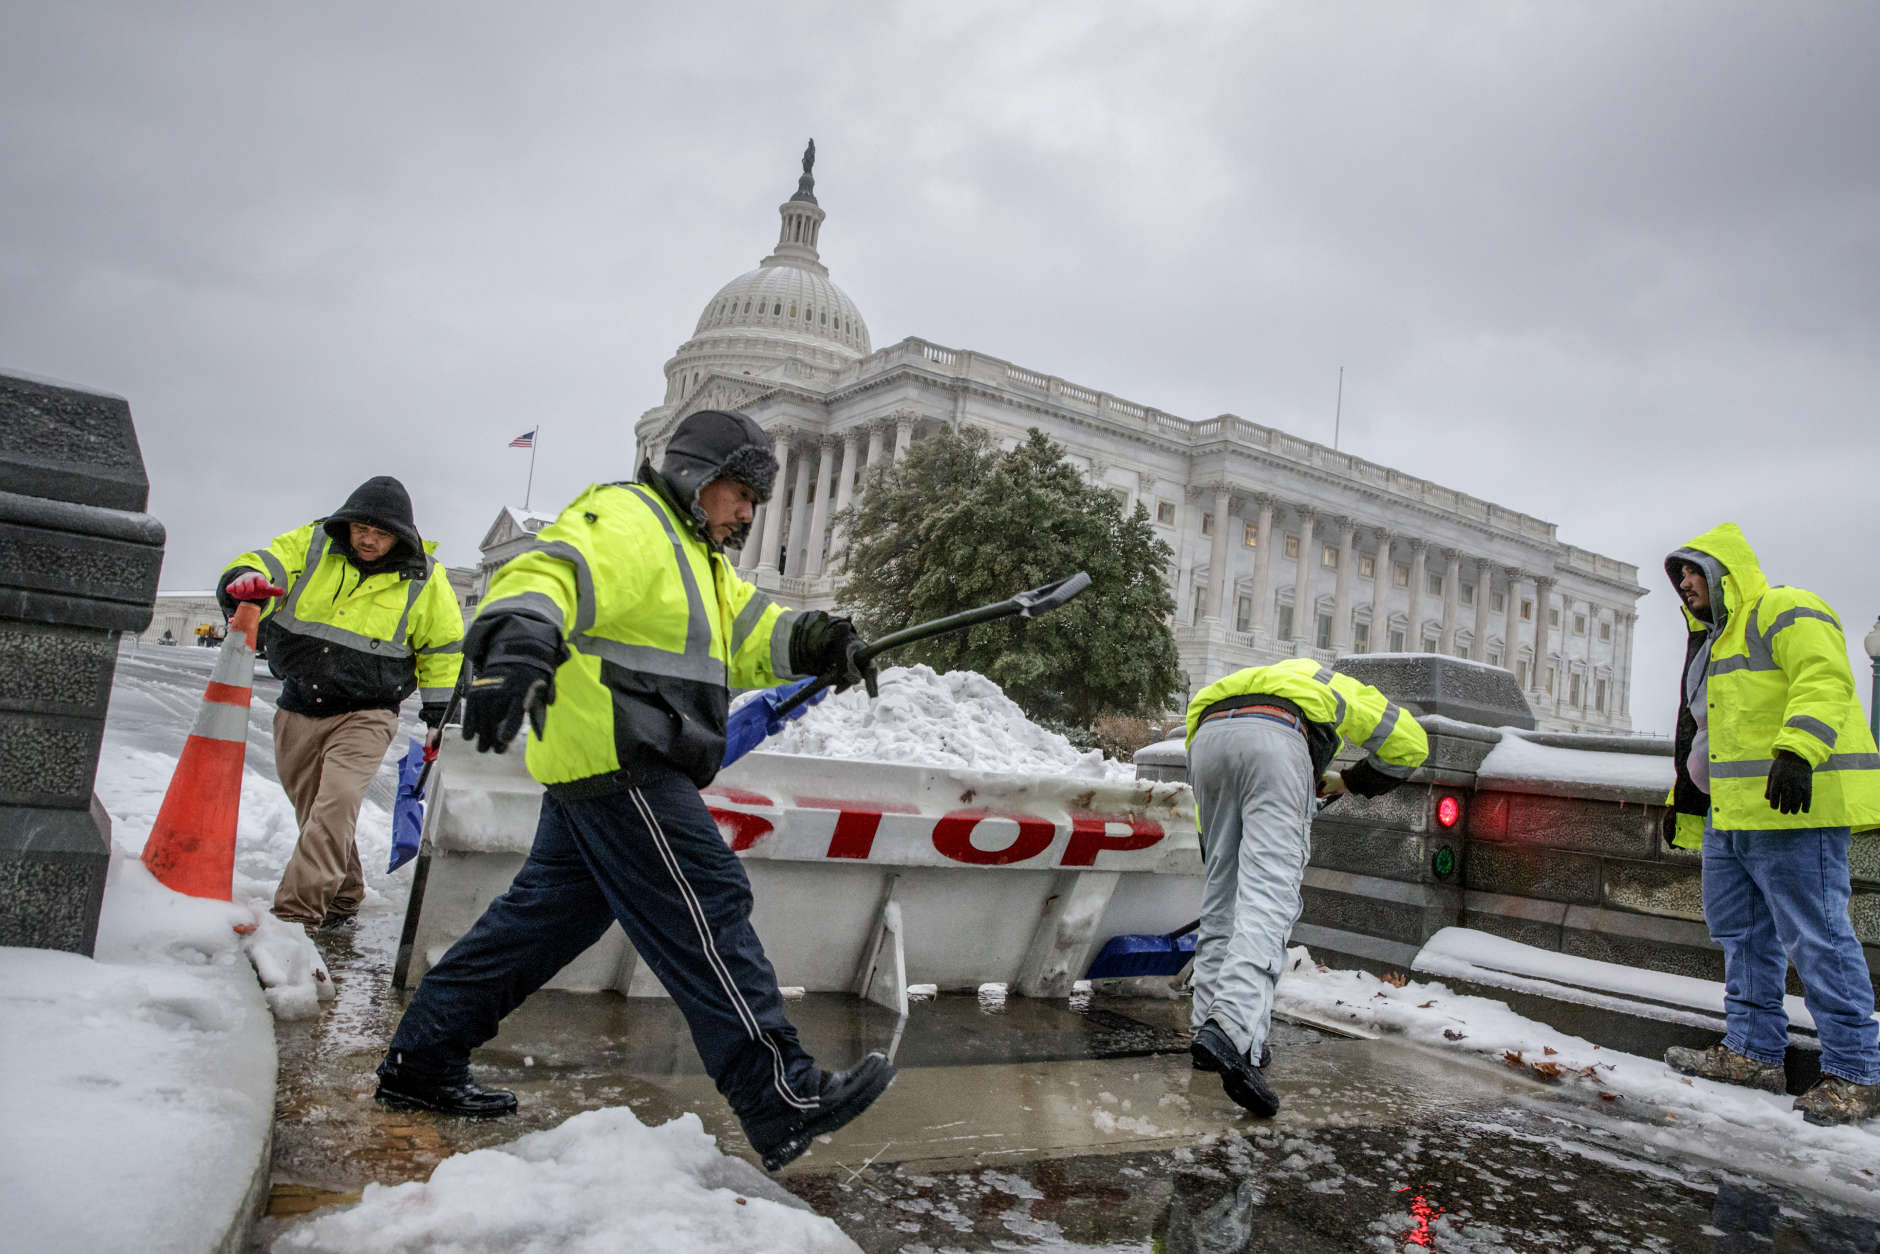 Workmen clear snow from a security barricade on Capitol Hill in Washington, Tuesday, March, 14, 2017. A late-season storm is dumping a messy mix of snow, sleet and rain on the mid-Atlantic, complicating travel, knocking out power and closing schools and government offices around the region.  (AP Photo/J. Scott Applewhite)